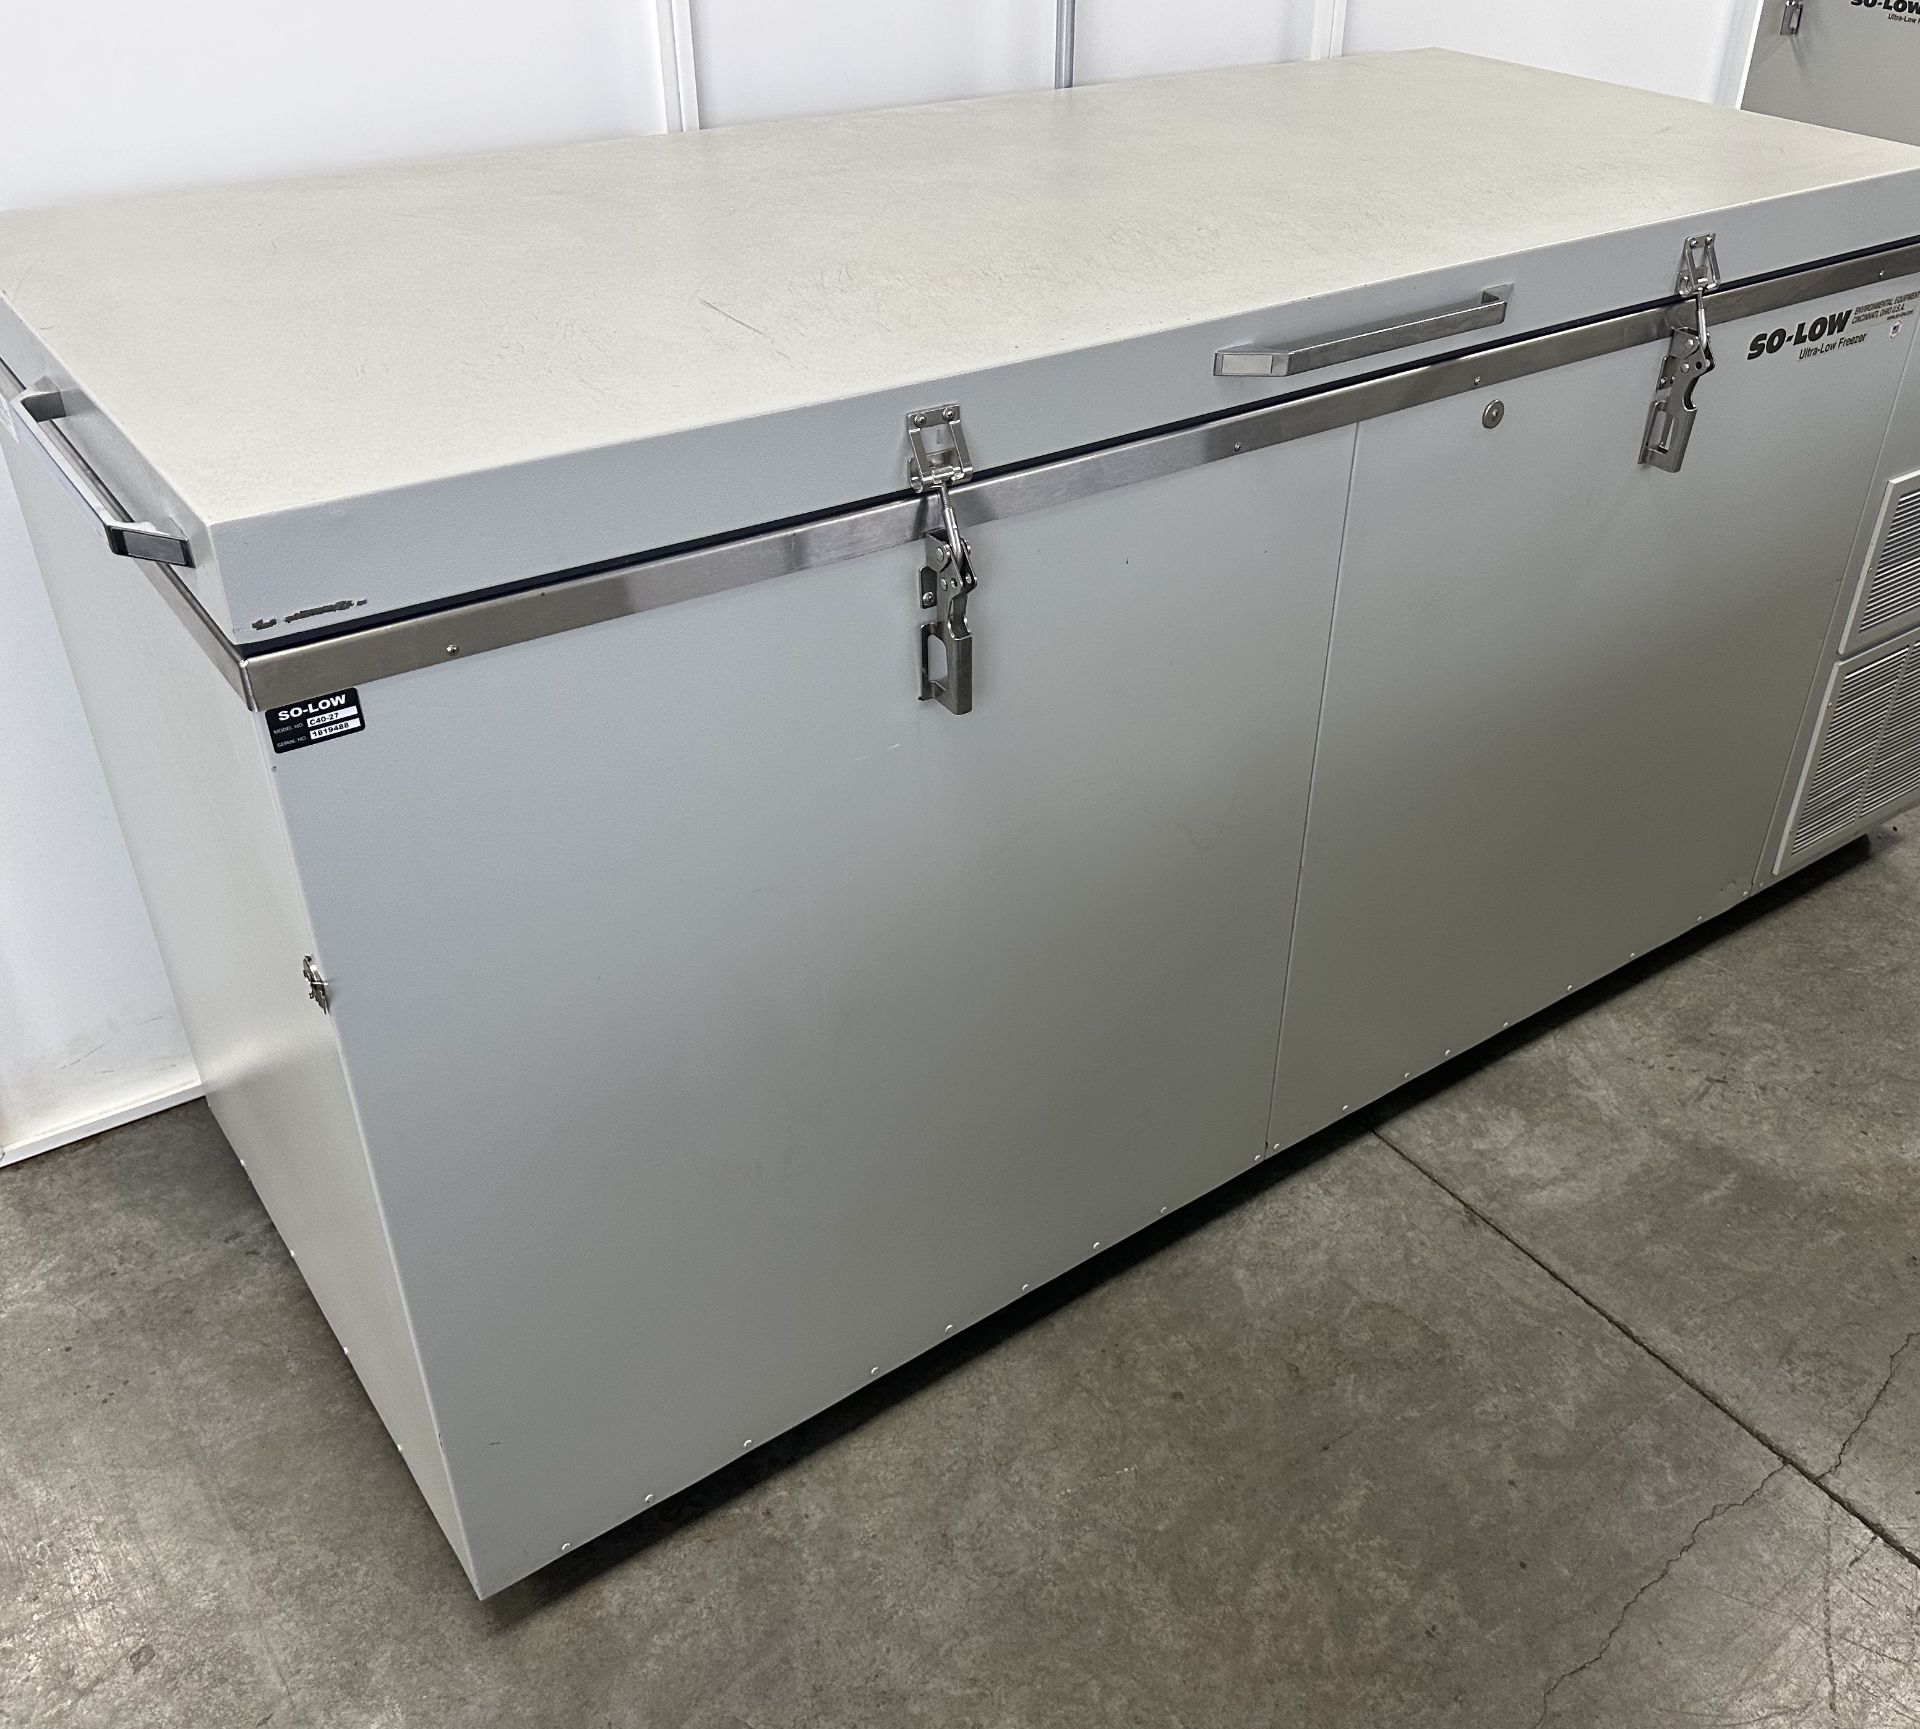 Lot of (3) Used So Low 27 CuFt Explosion Proof Chest-Style Freezer. Model C40-27 - Image 2 of 19